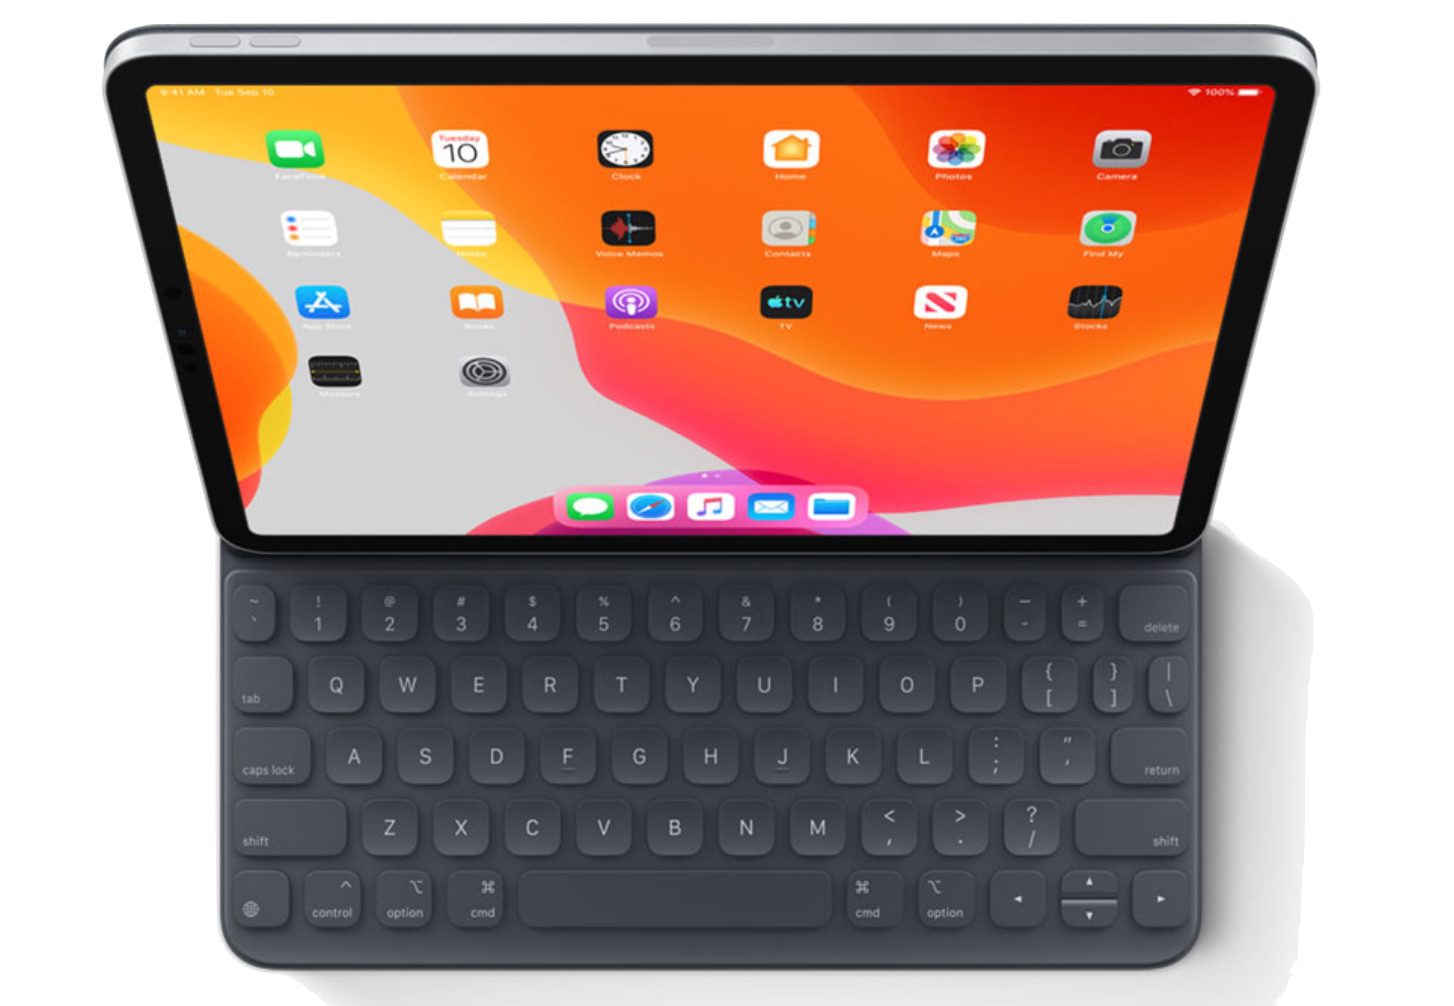 Typing straight quotes with iPad keyboard